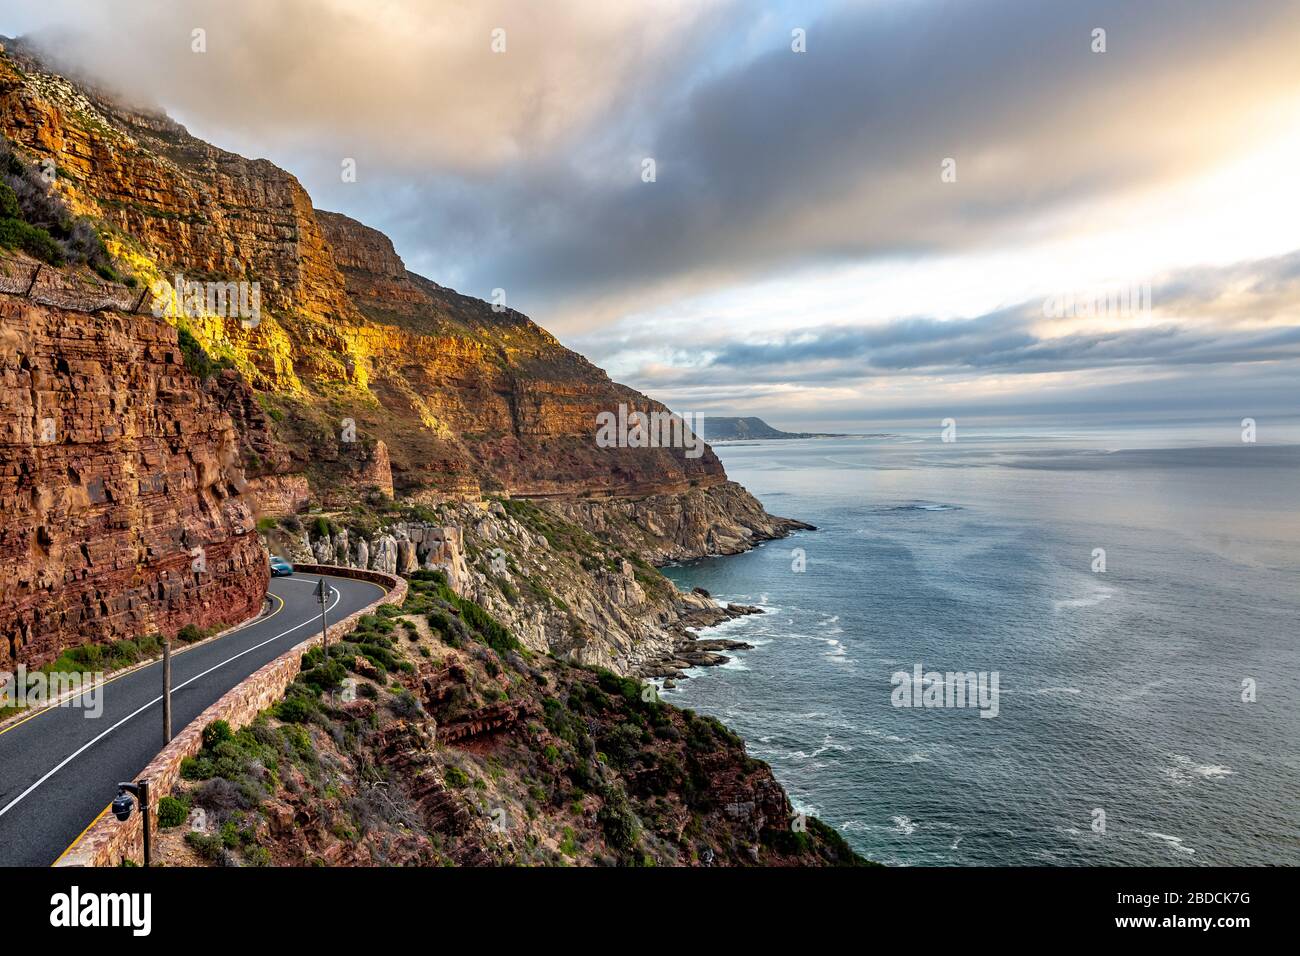 Chapman's Peak Drive in Cape Town, South Africa. Stock Photo